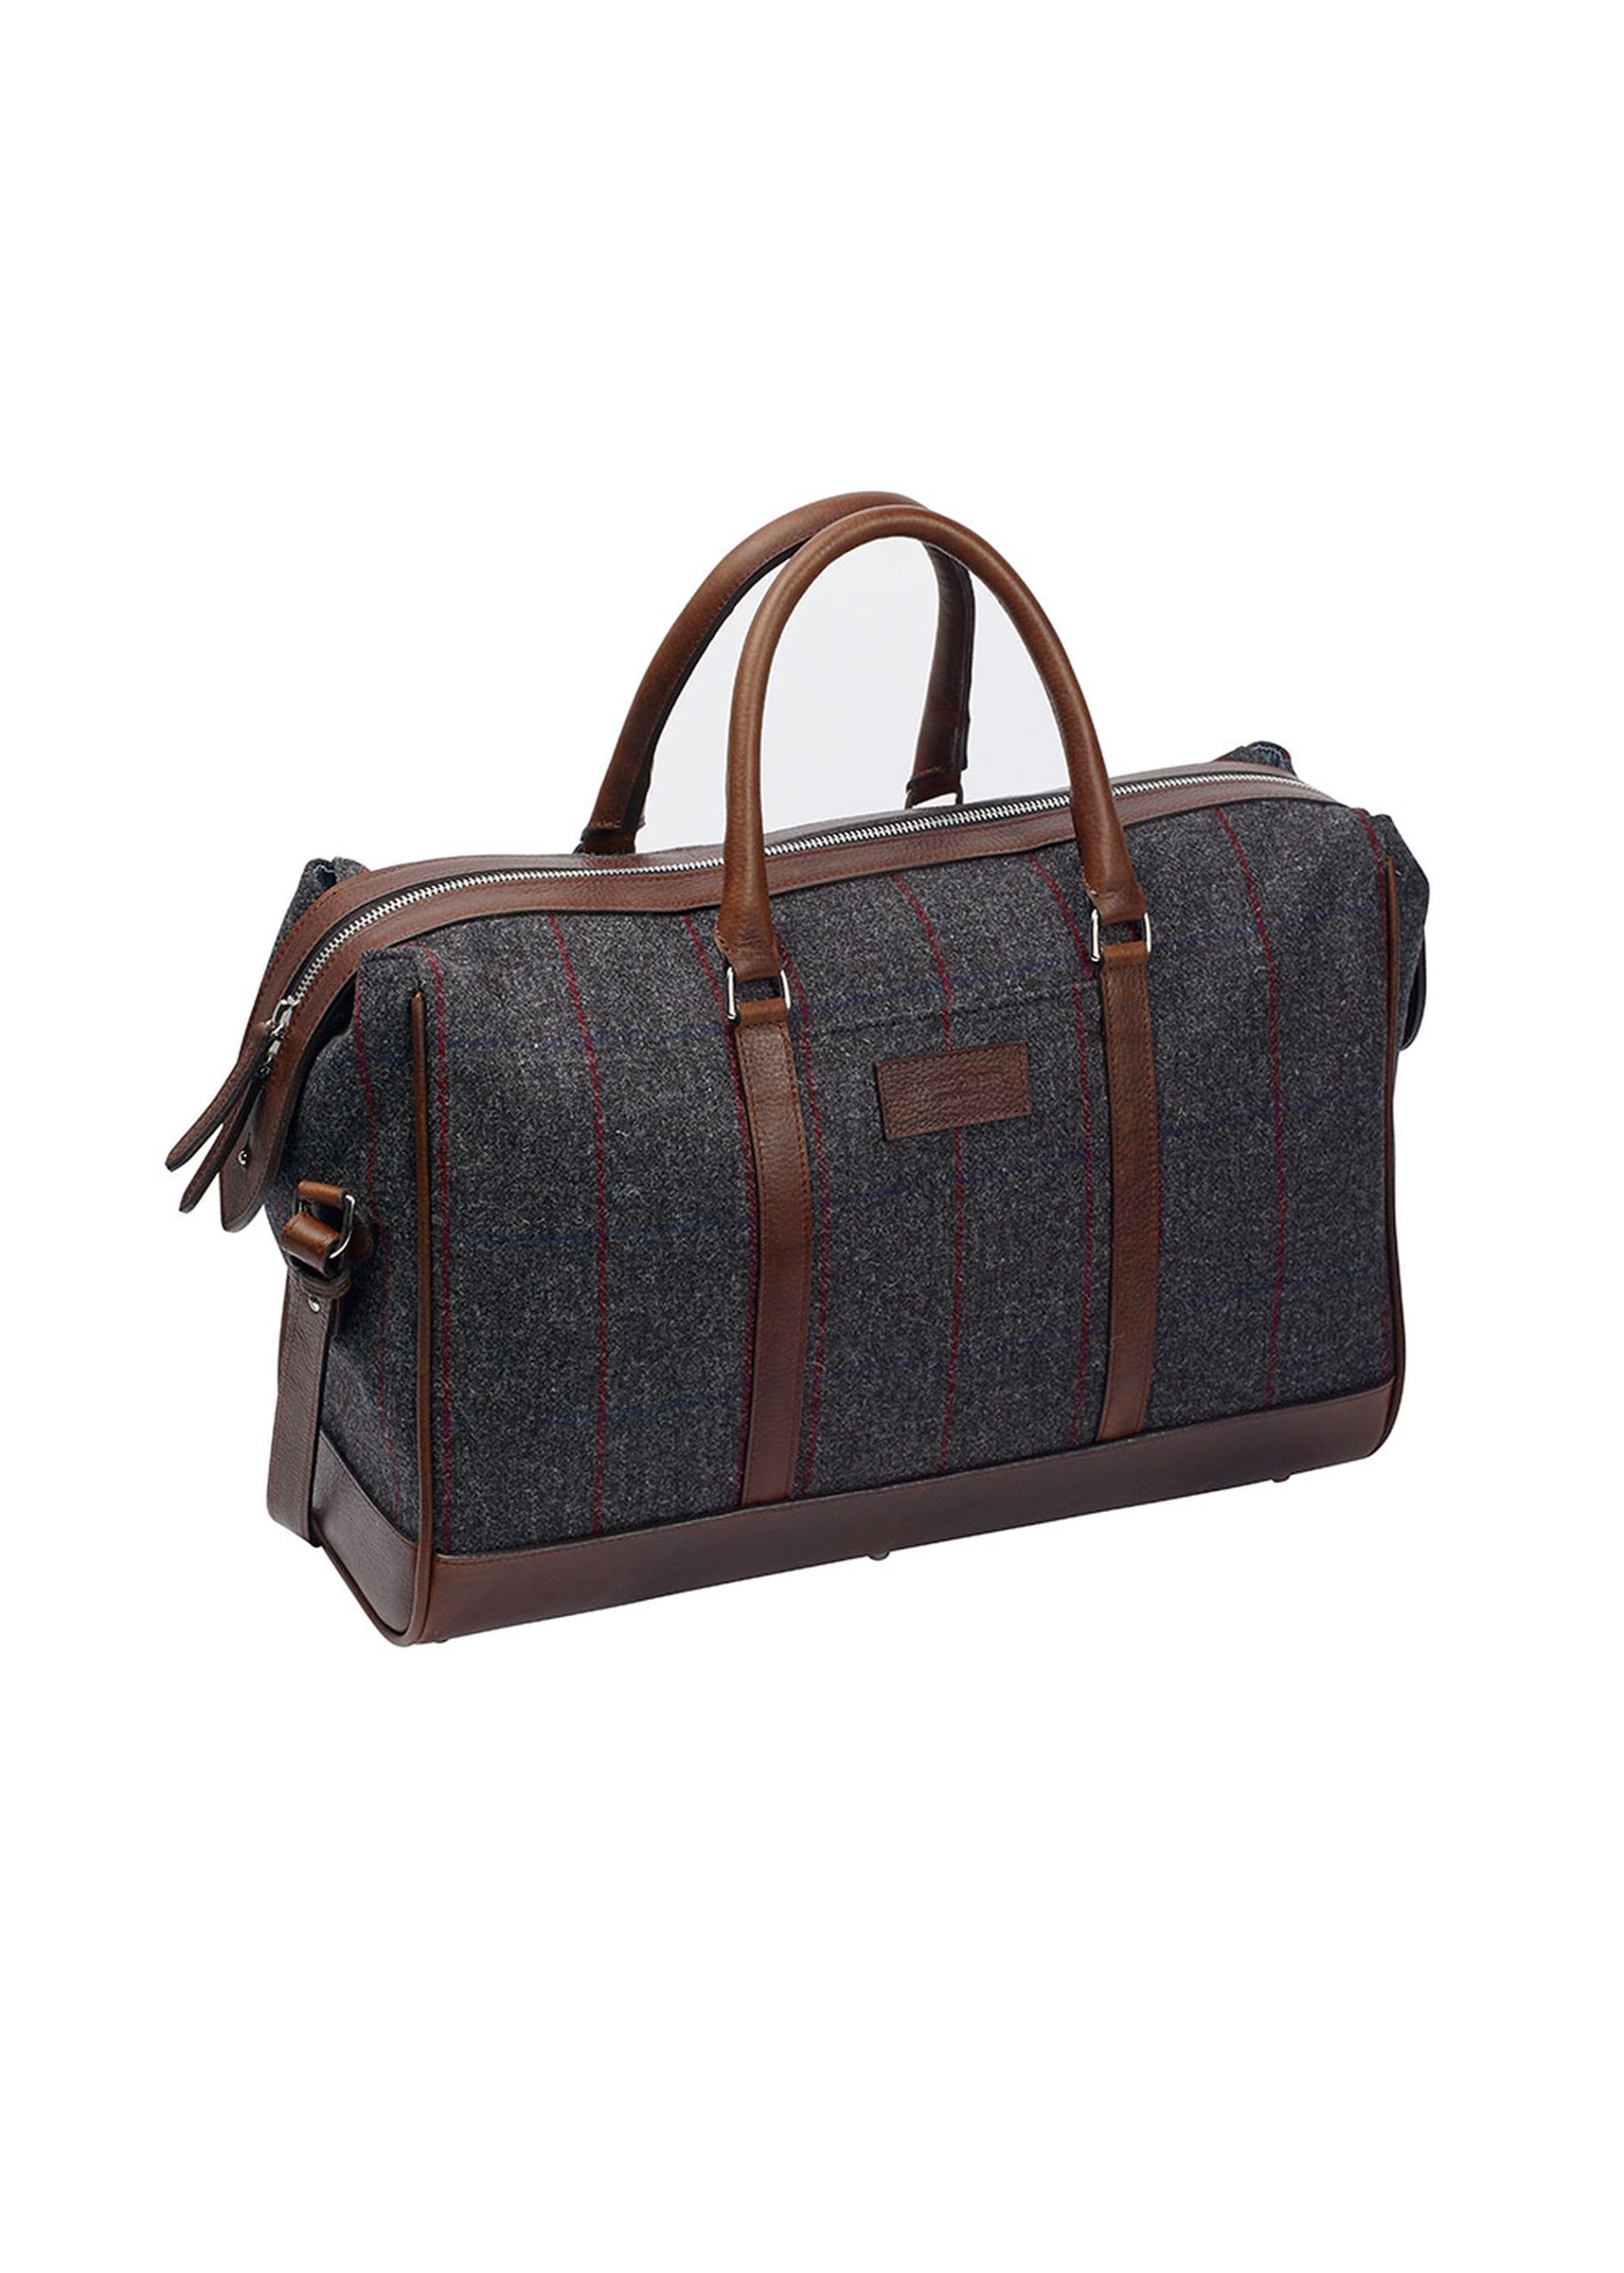 Roderick Charles grey tweed overnight bag perfect for overnight stays